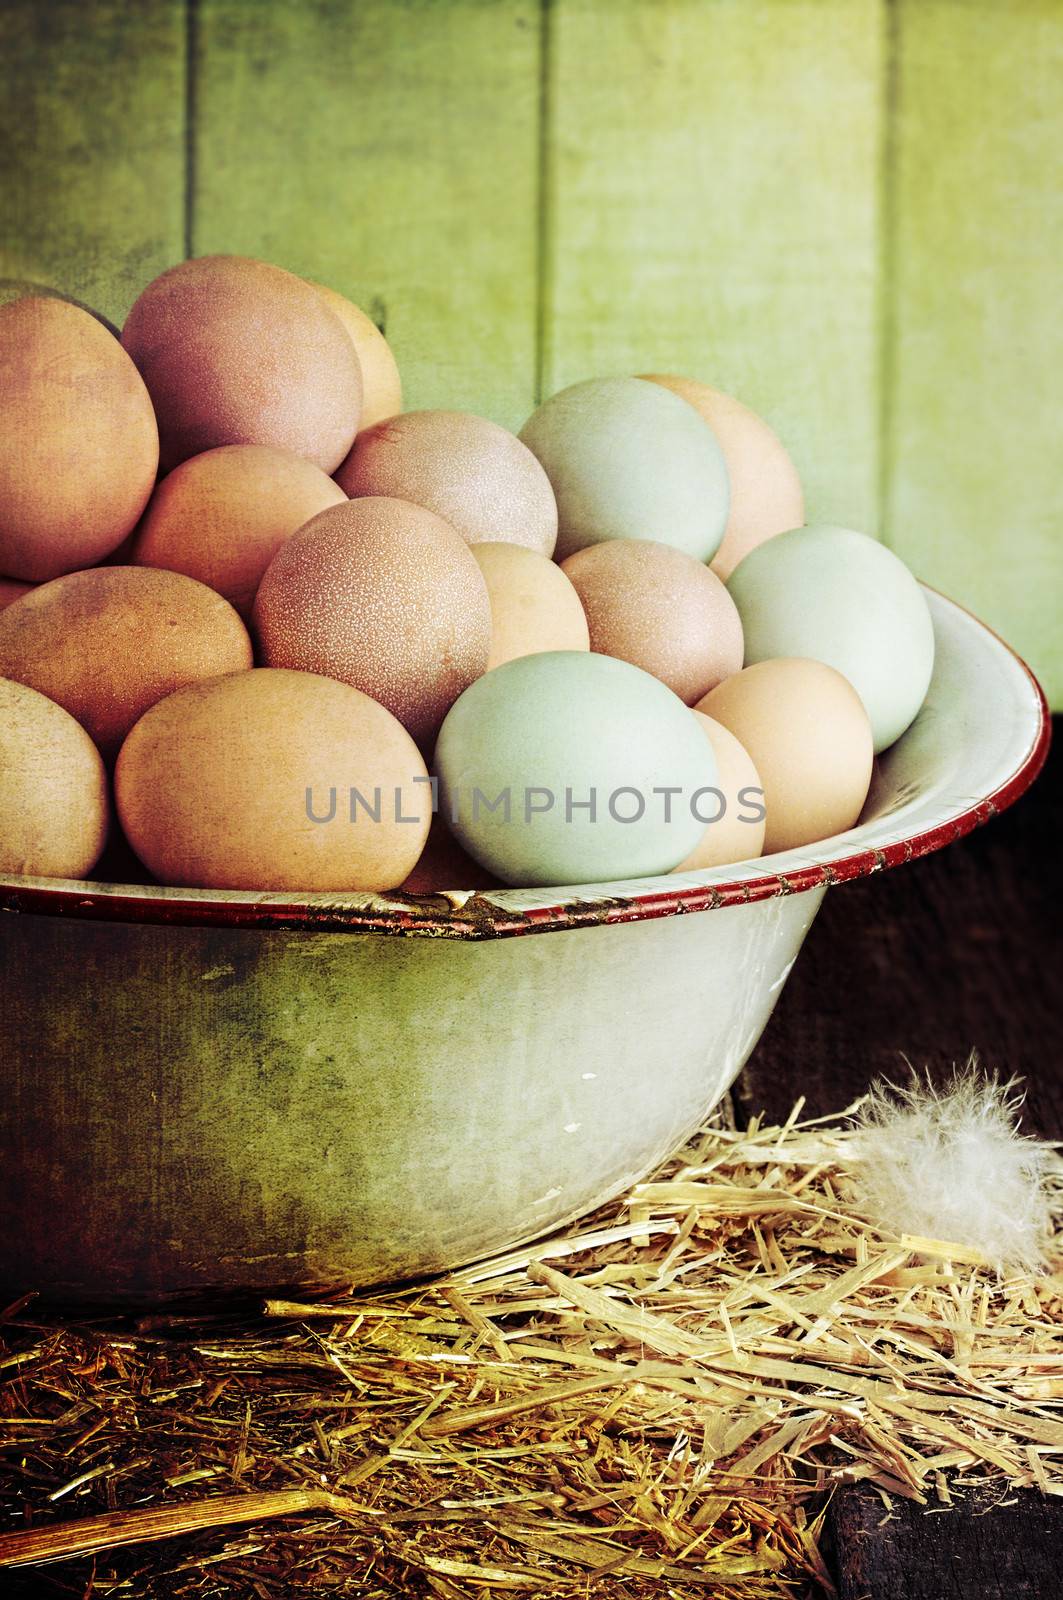 Textured image of an antique wash pan filled with colorful fresh farm raised eggs against a rustic background.